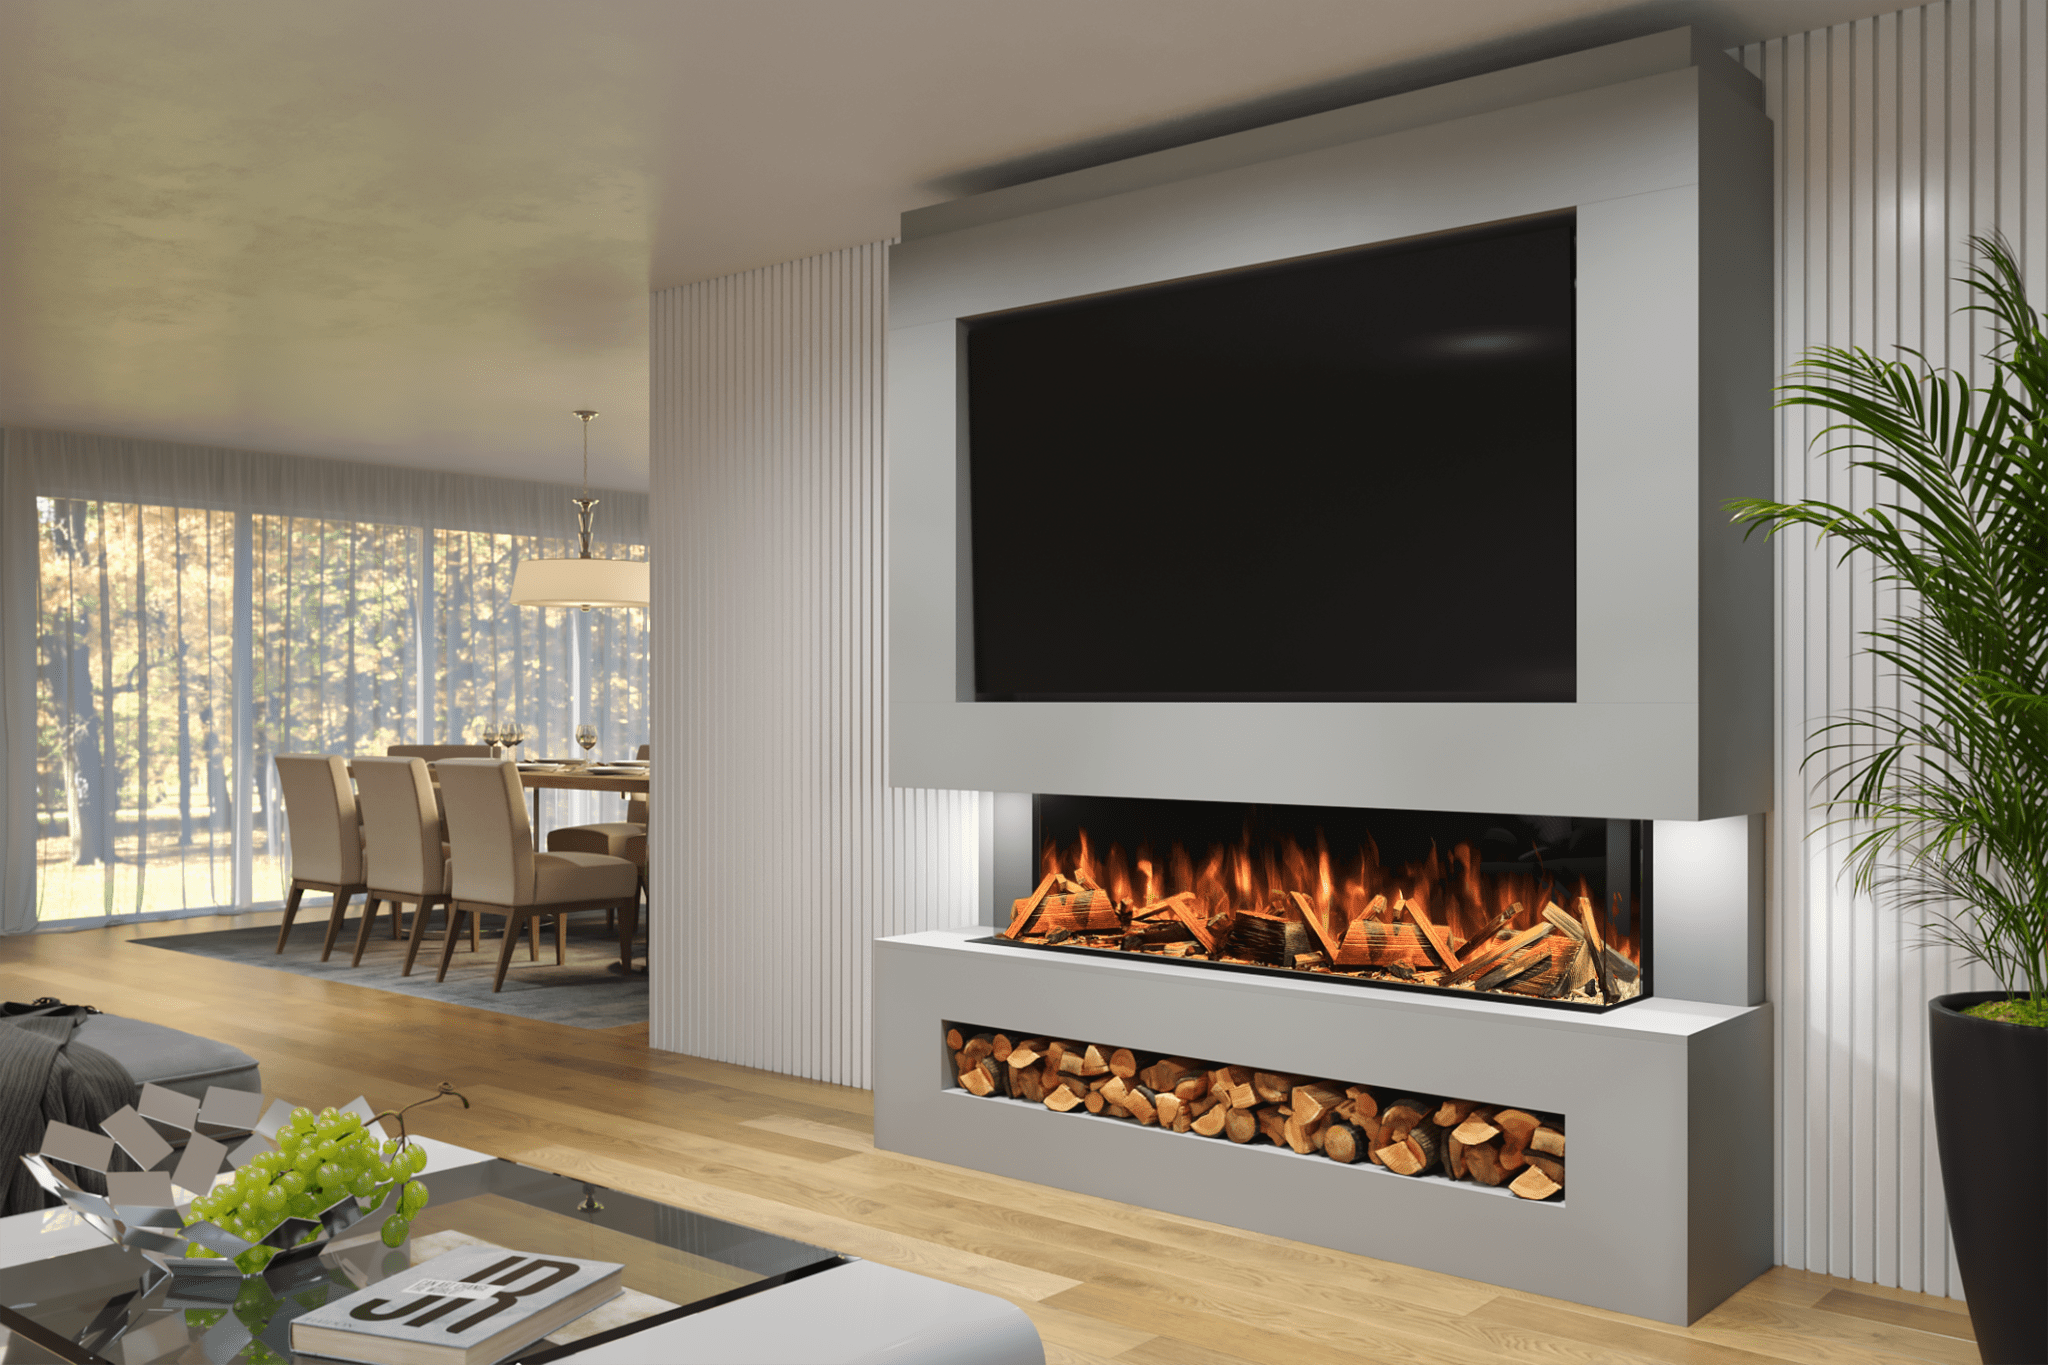 Get Media Wall Ideas with Fire in the UK